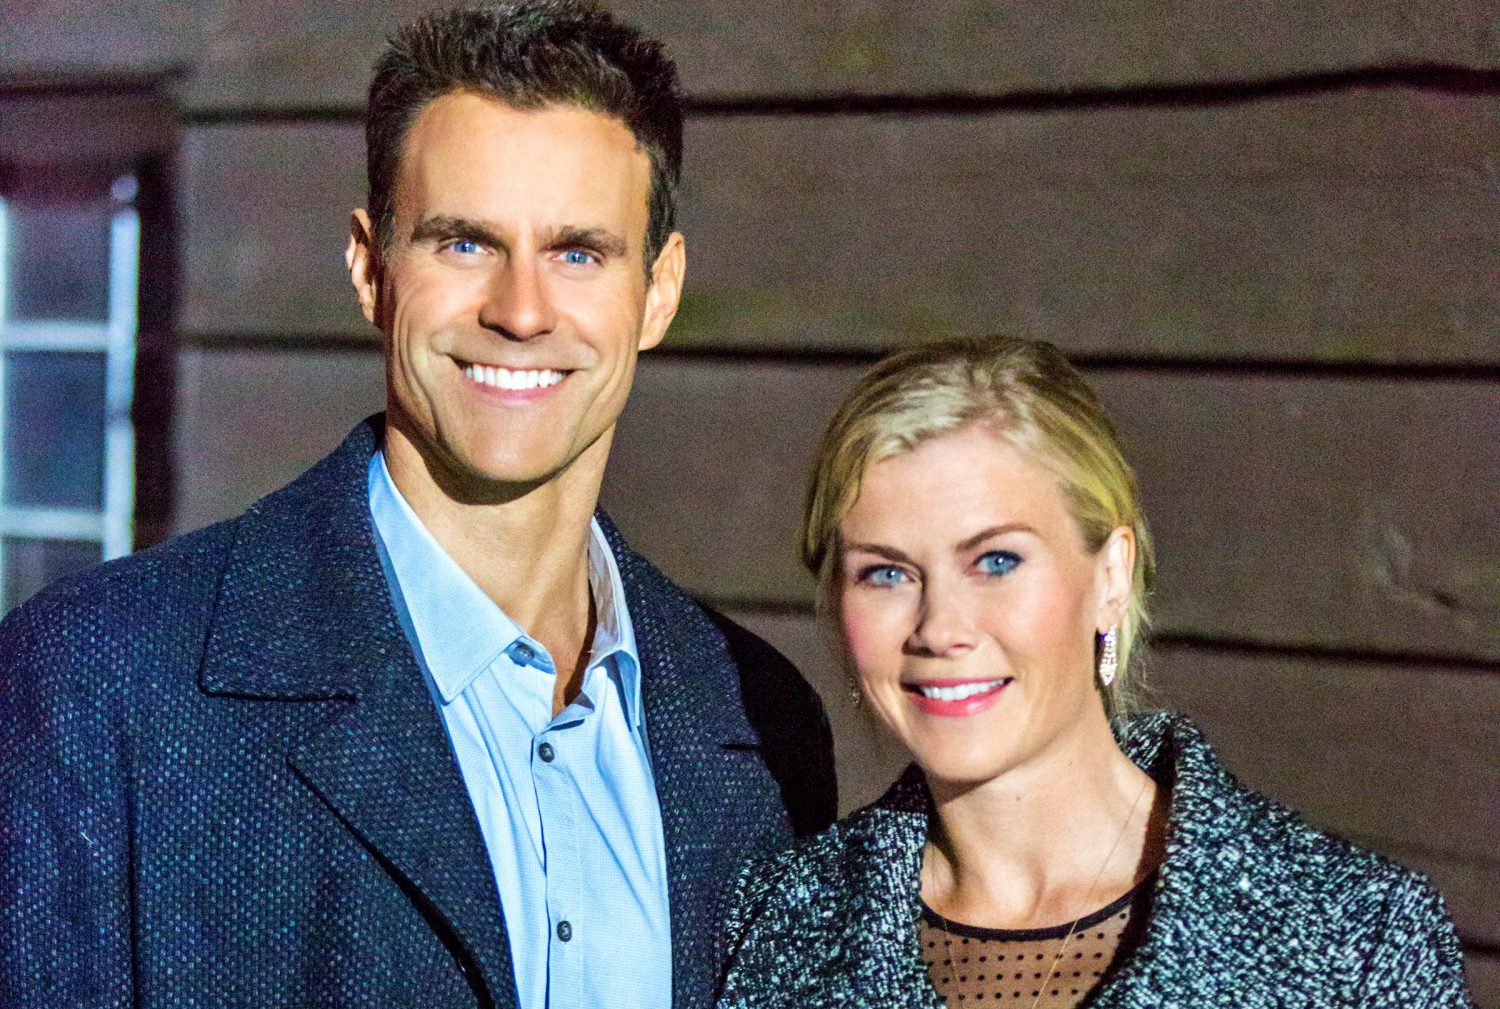 Alison Sweeney and Cameron Mathison to star in Carrot Cake: A Hannah Swensen Mystery on Hallmark Movies & Mysteries.